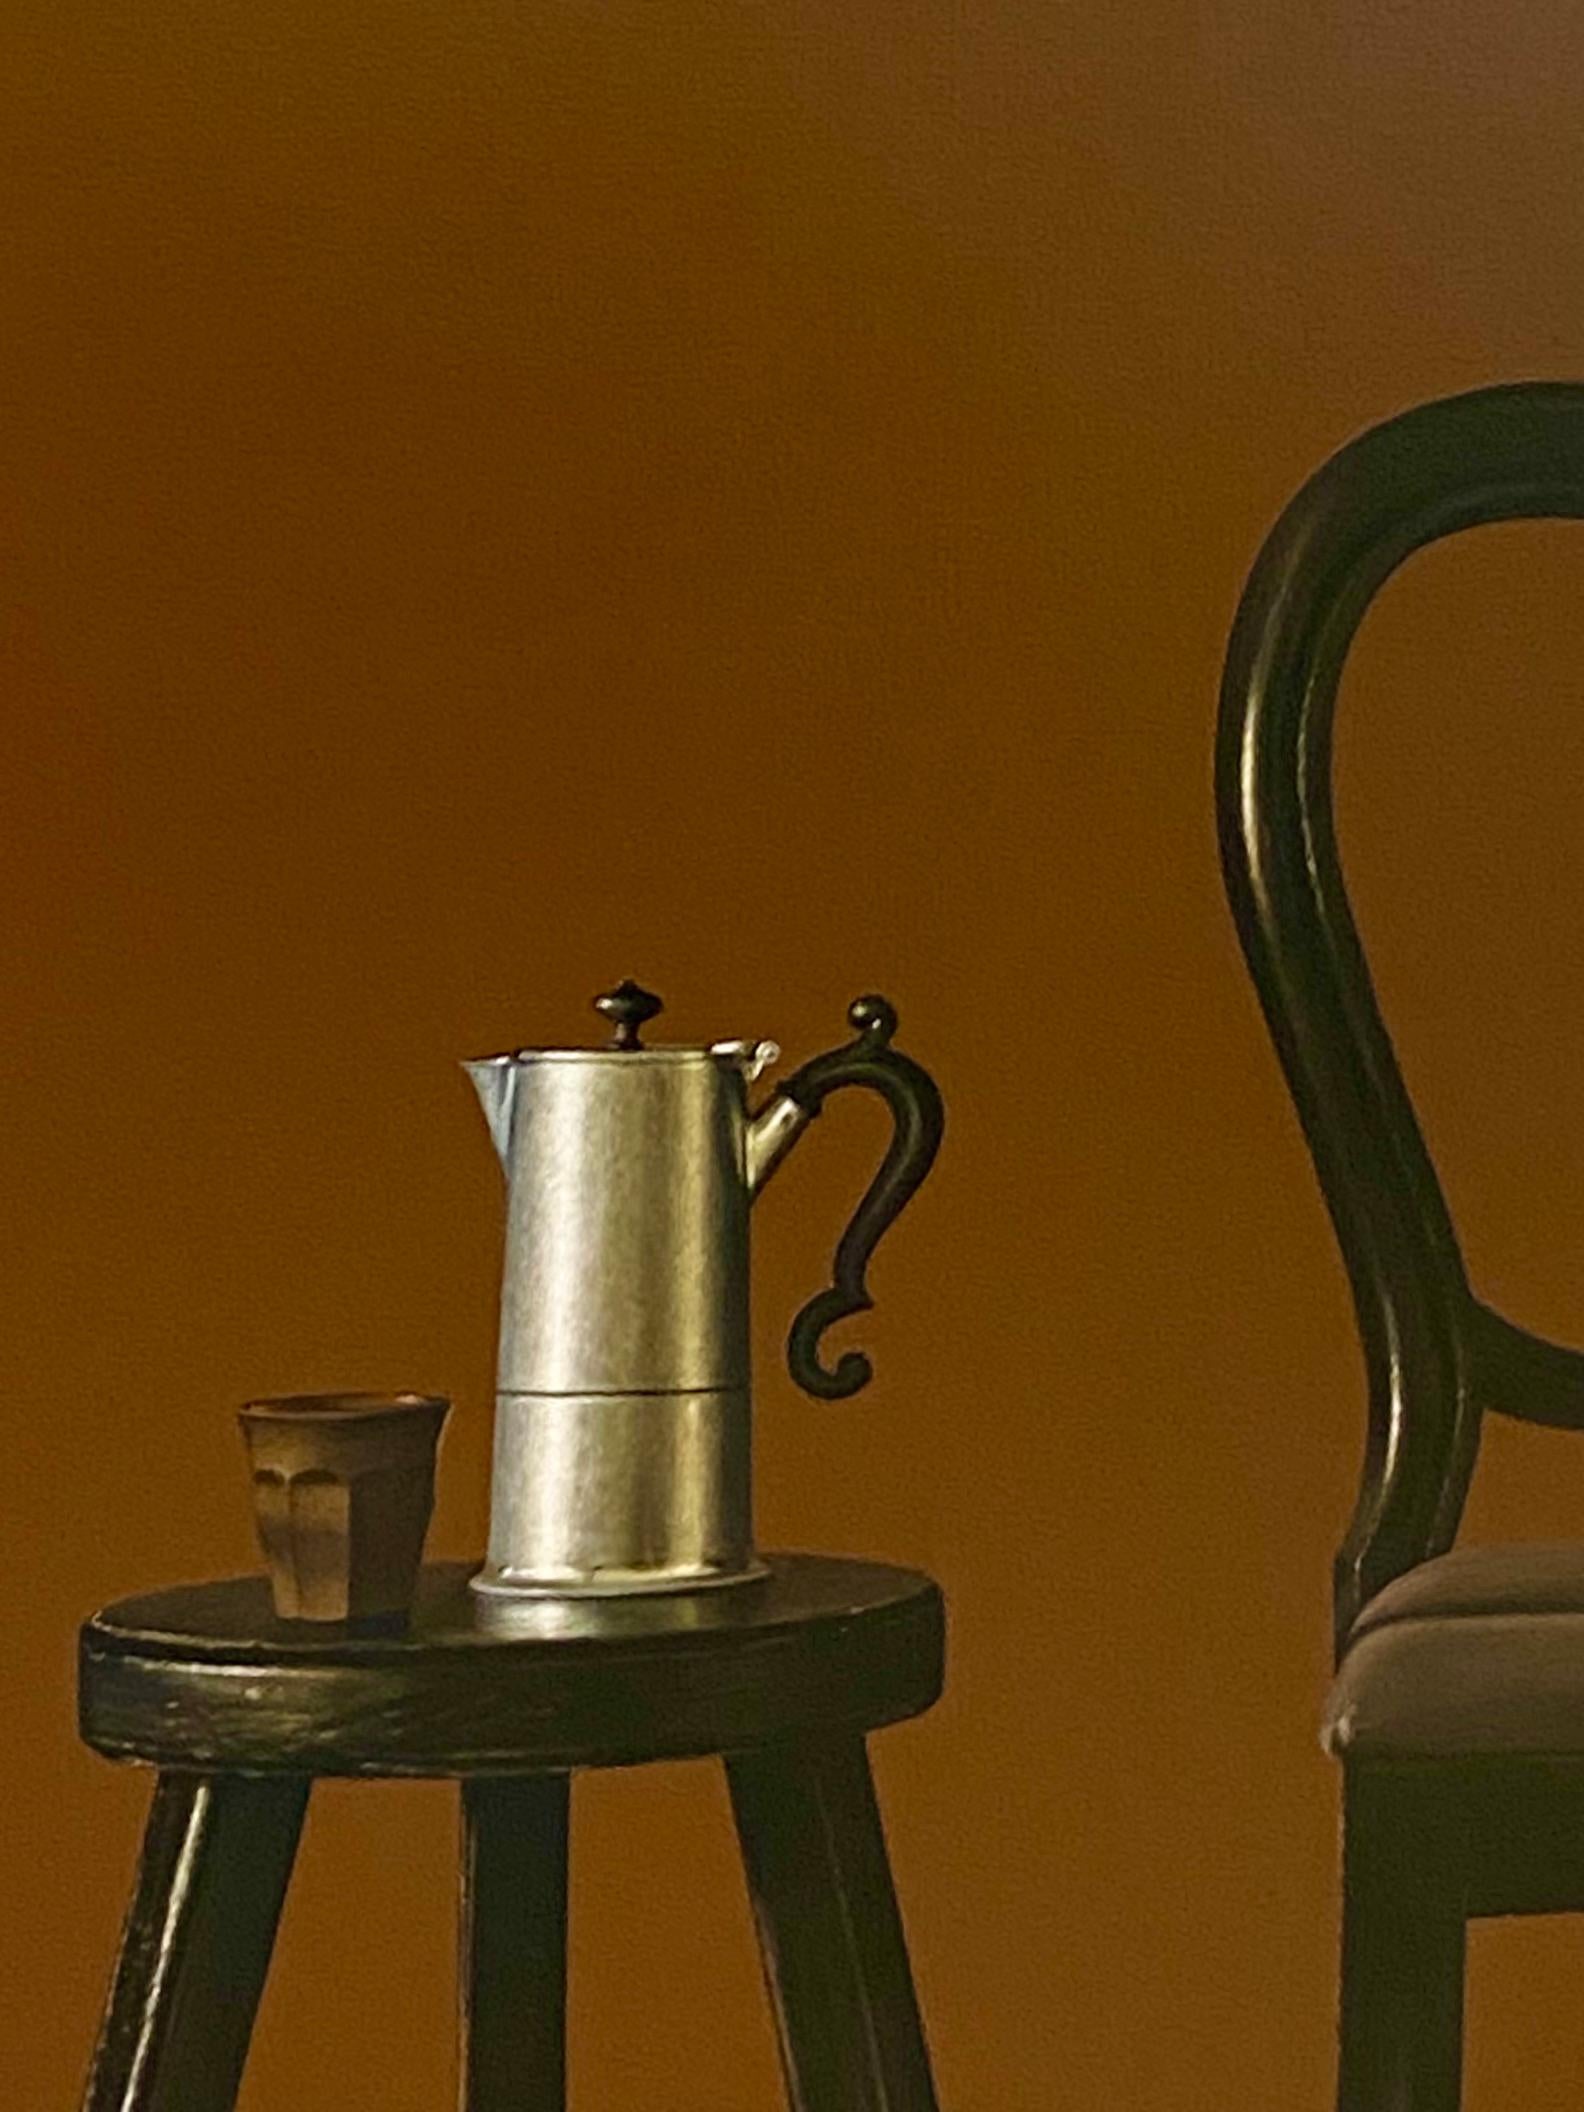 Chair with Percolator-21st Contemporary Dutch Still-life painting with Furniture 3